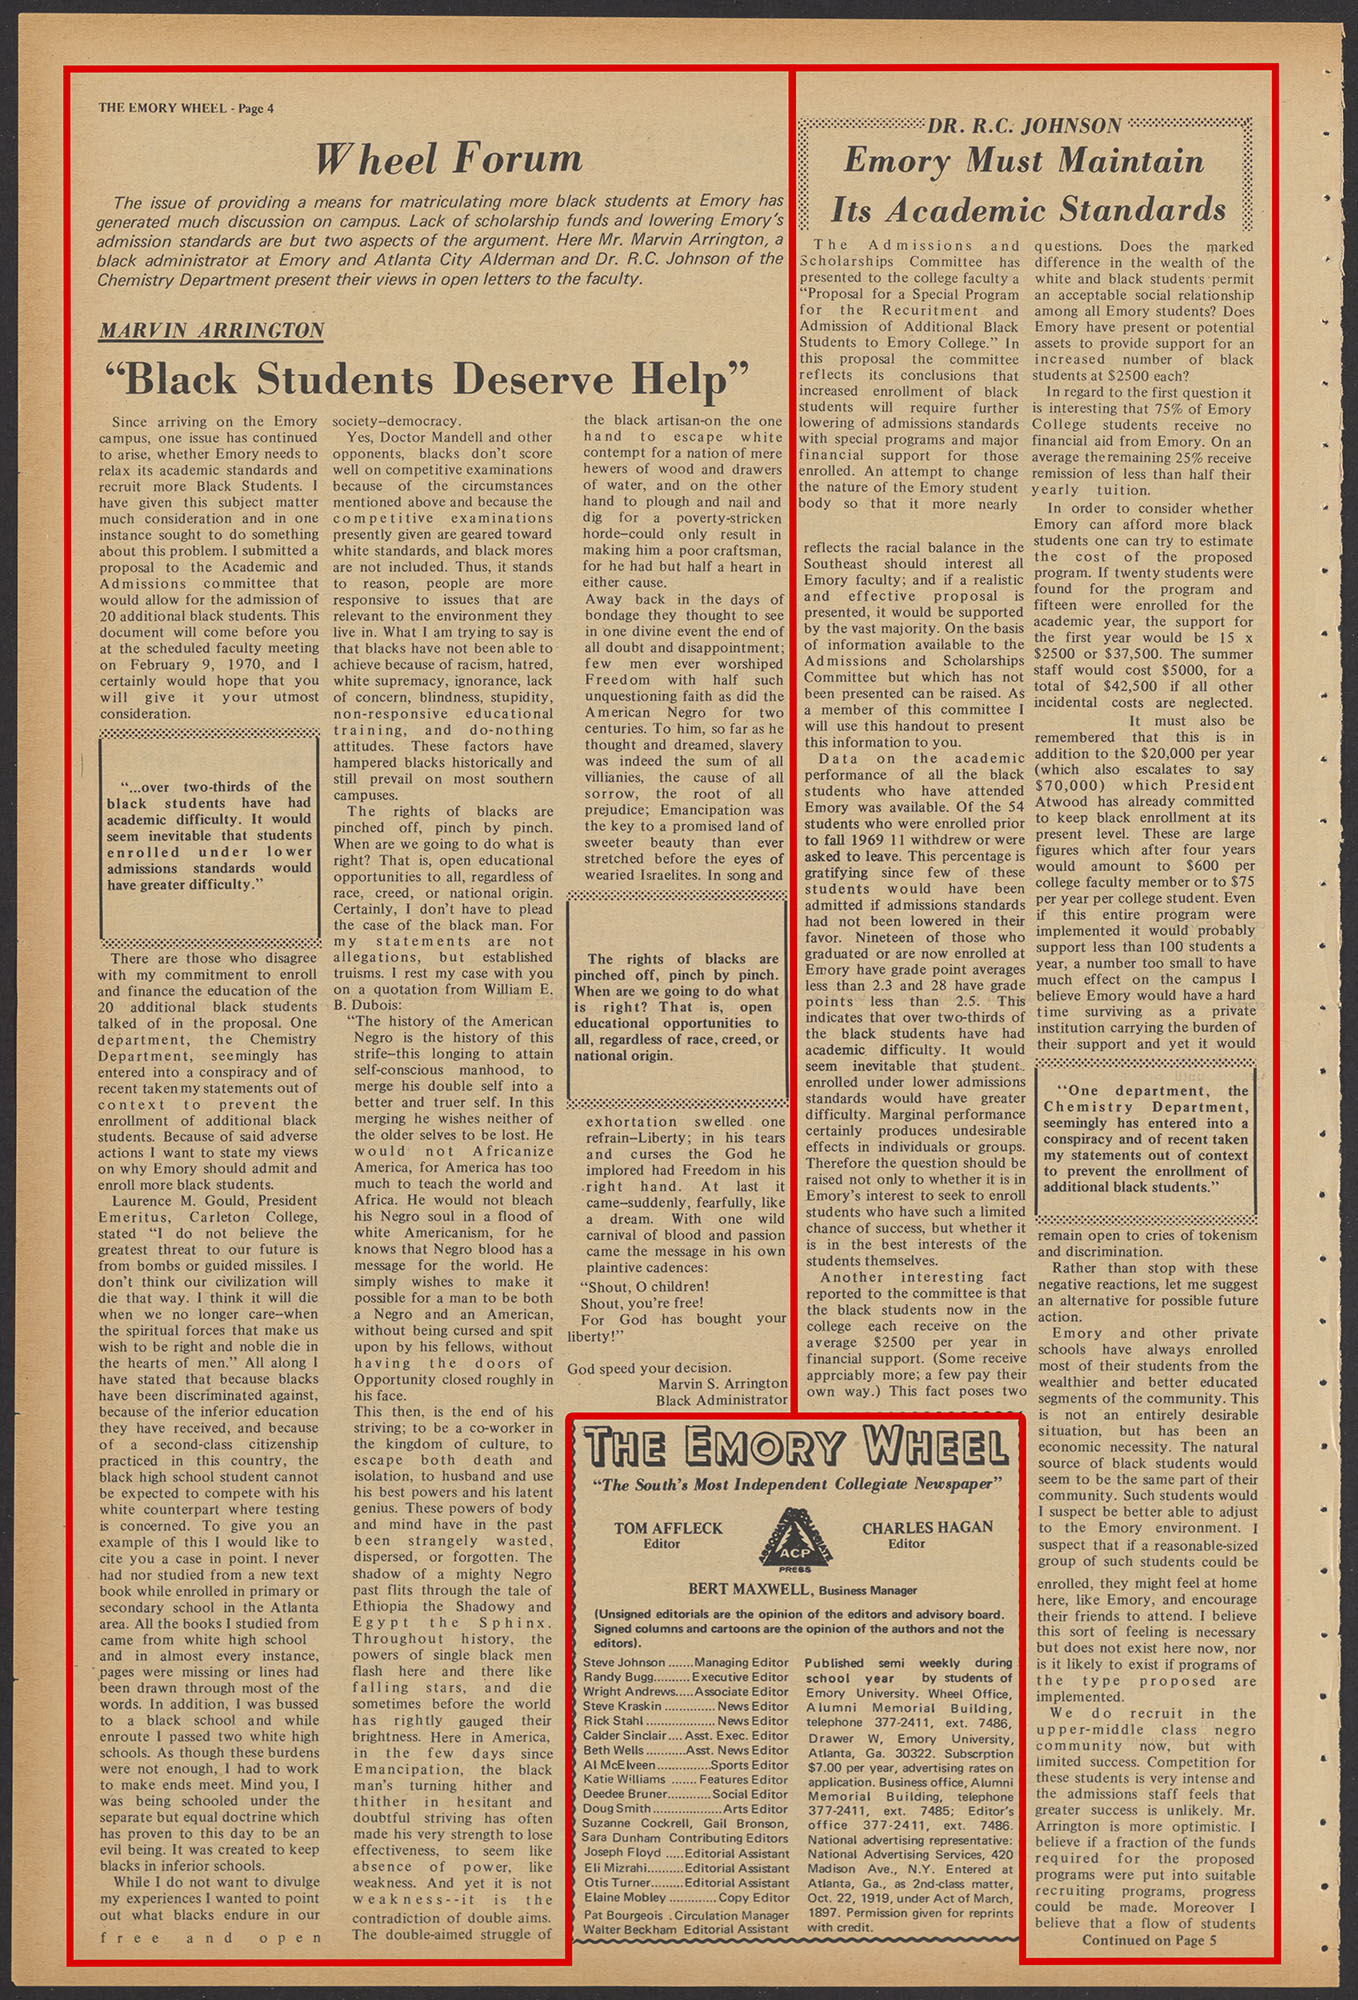 Emory Wheel newspaper page with Admin Arrington and Prof Johnson opinions on Black student matriculation